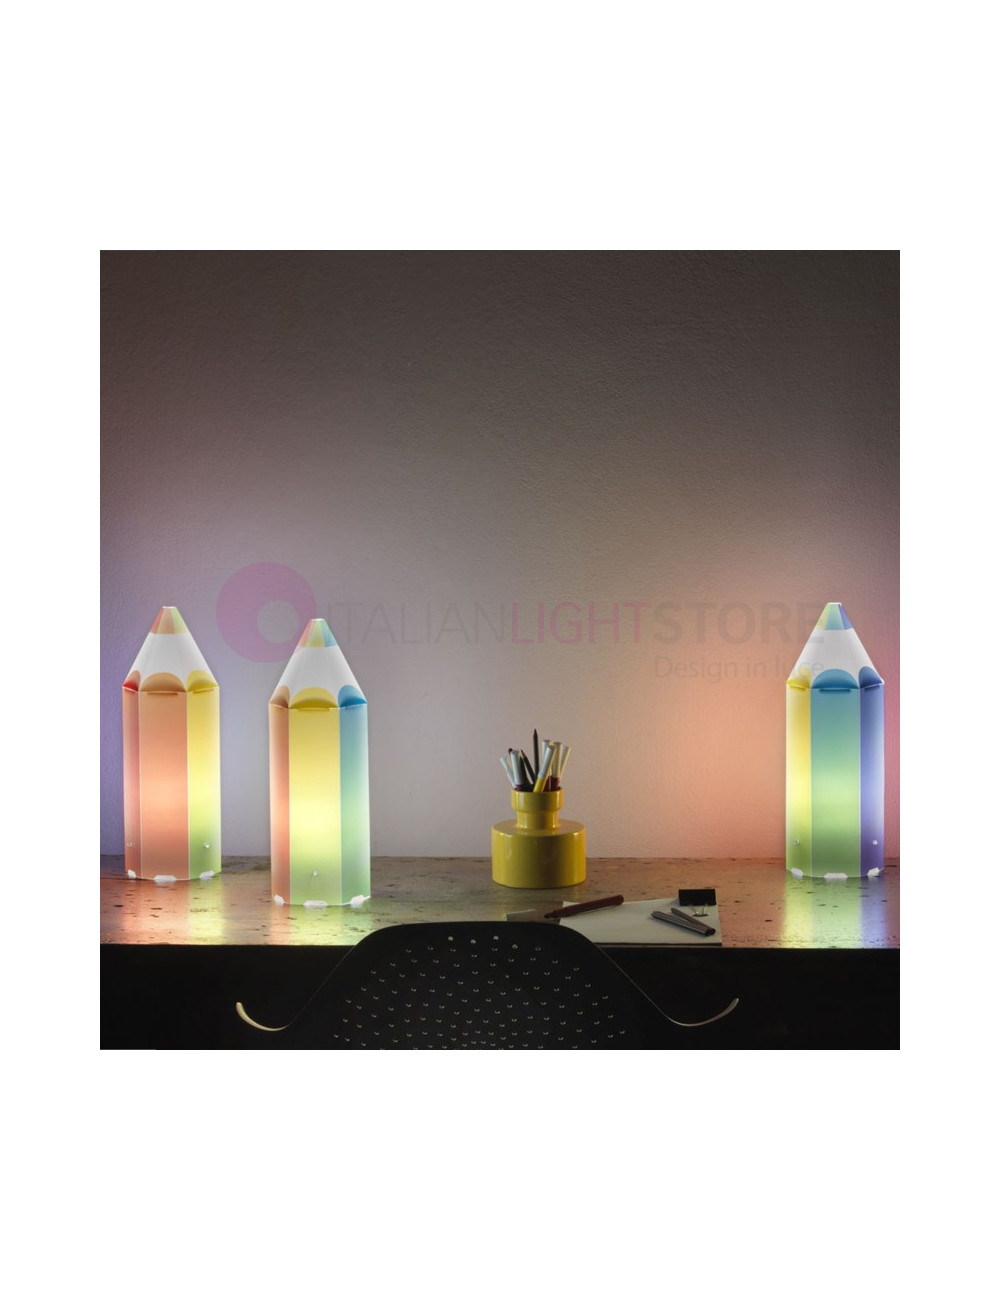 PIN-PEN Pencil-shaped table lamp for Bedroom